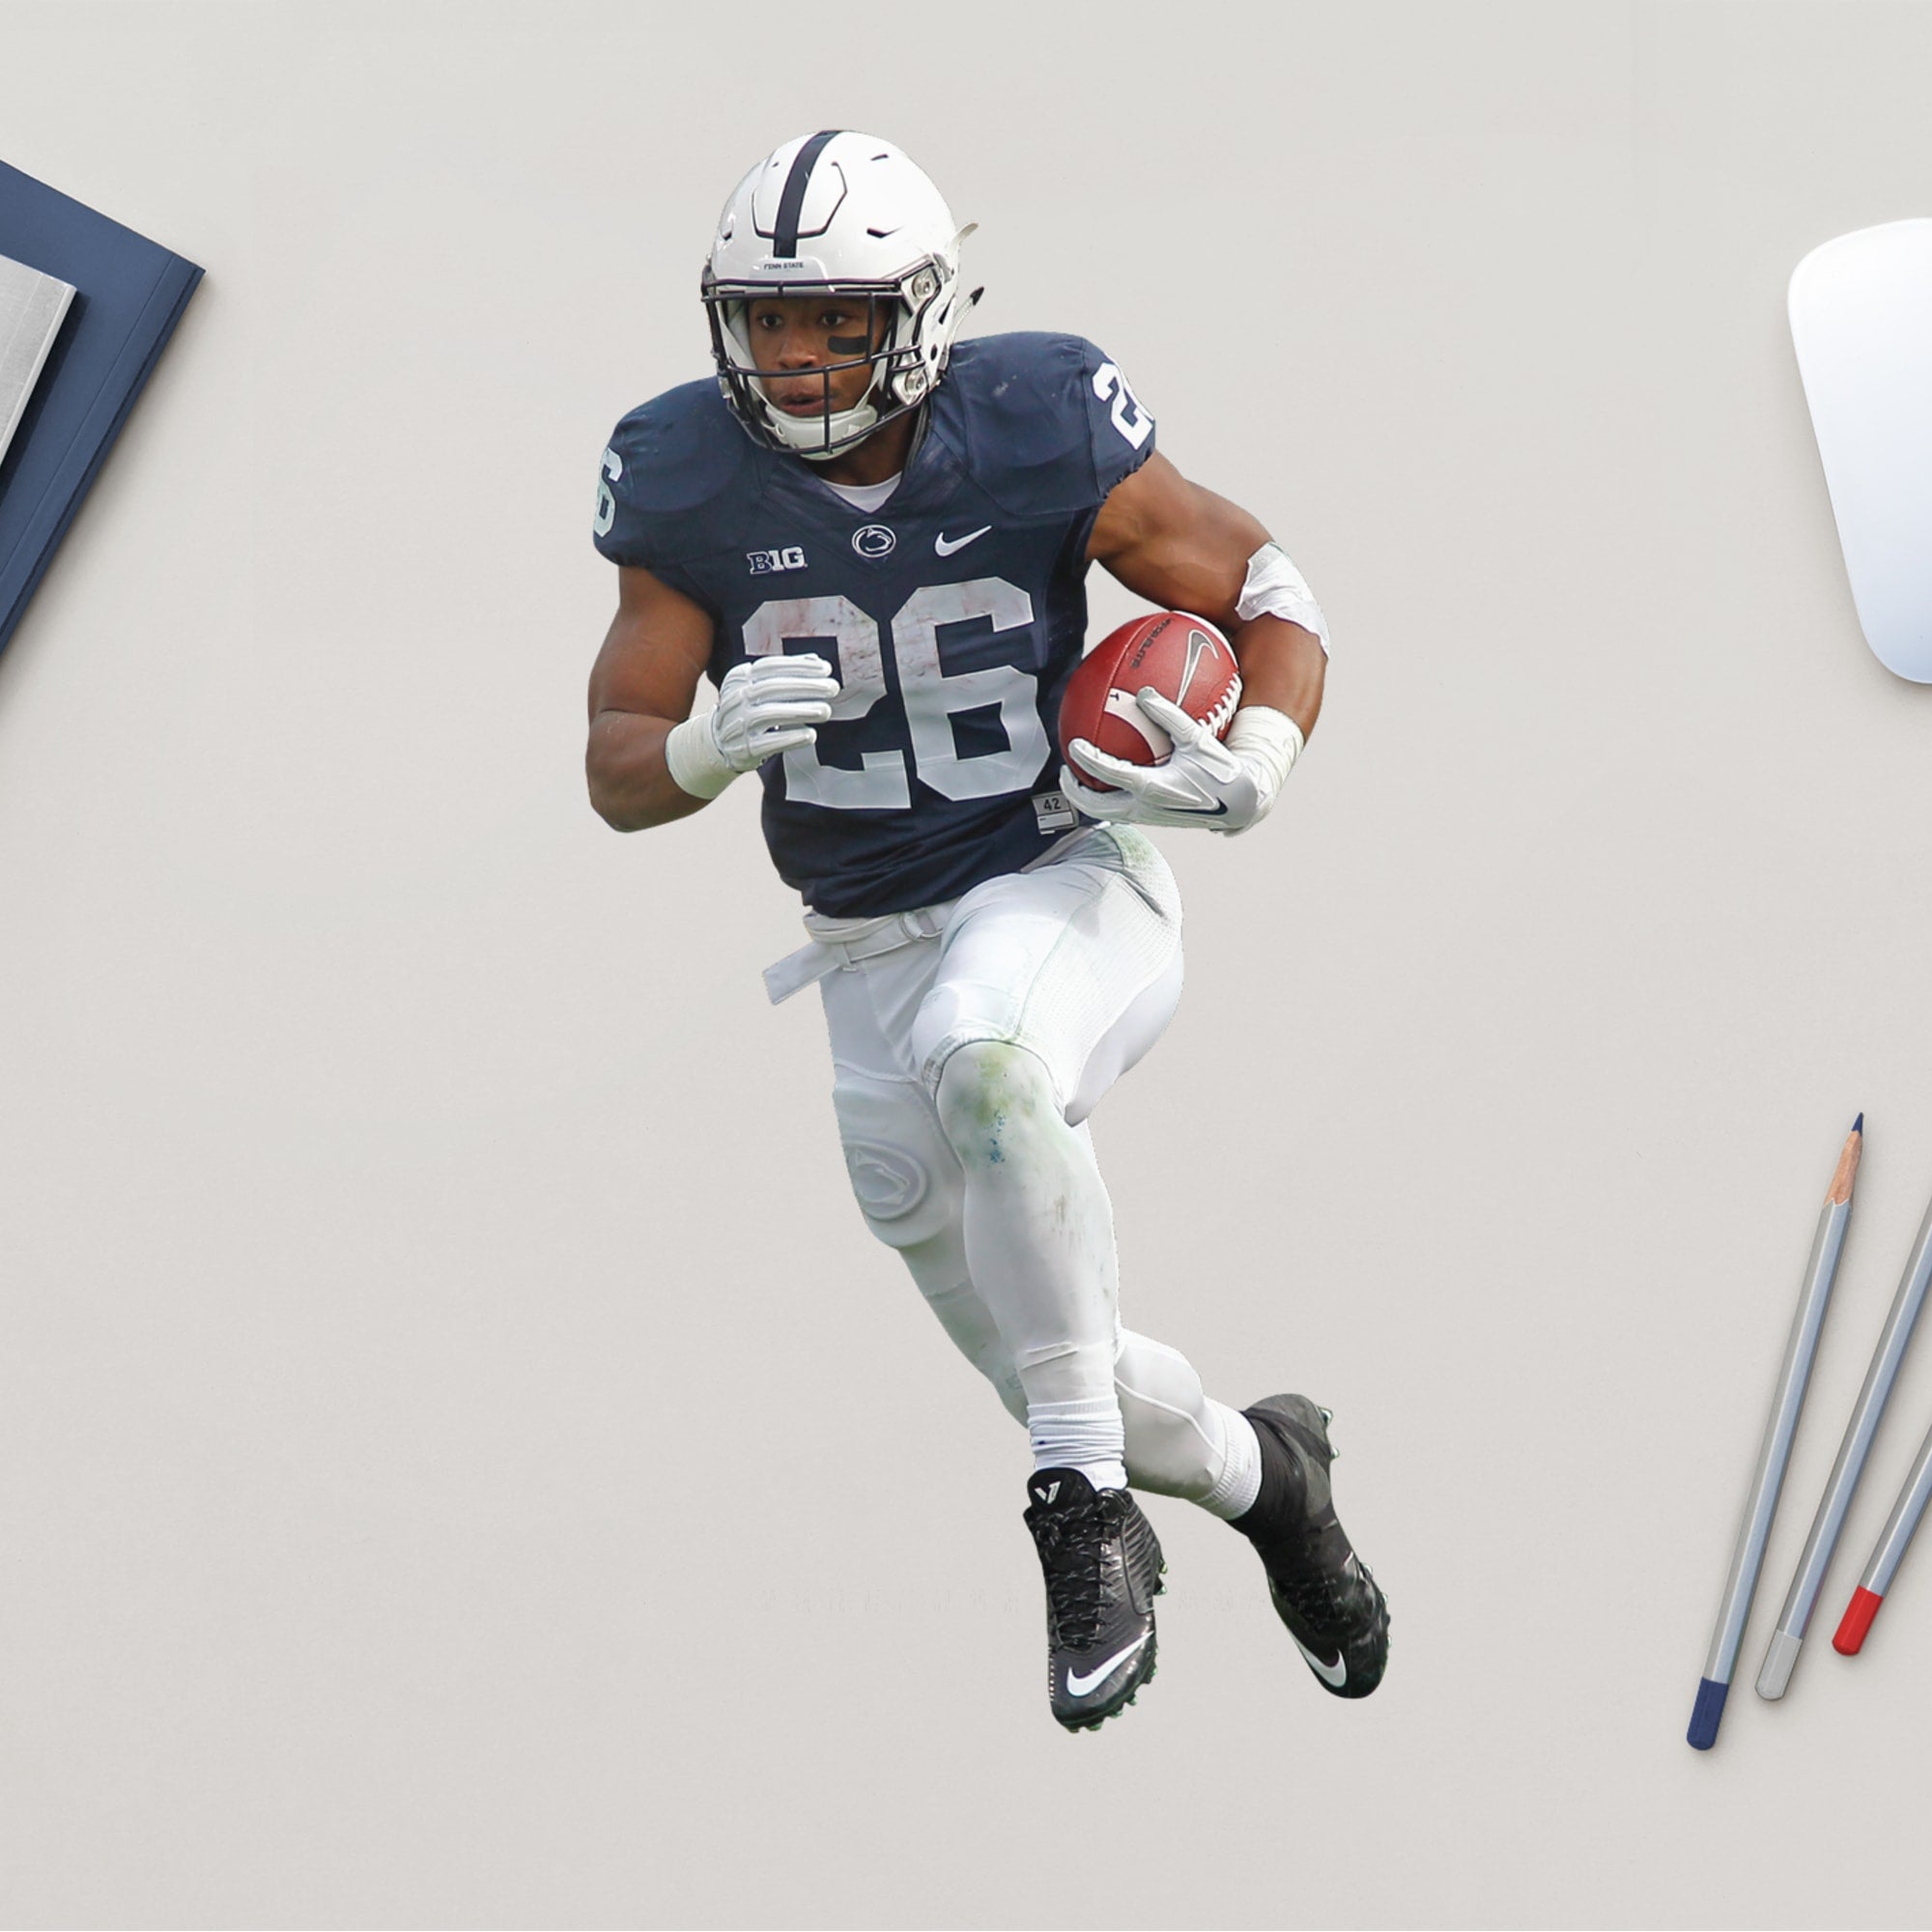 Saquon Barkley for Penn State Nittany Lions: Penn State - Officially Licensed Removable Wall Decal 8.0"W x 16.5"H by Fathead | V